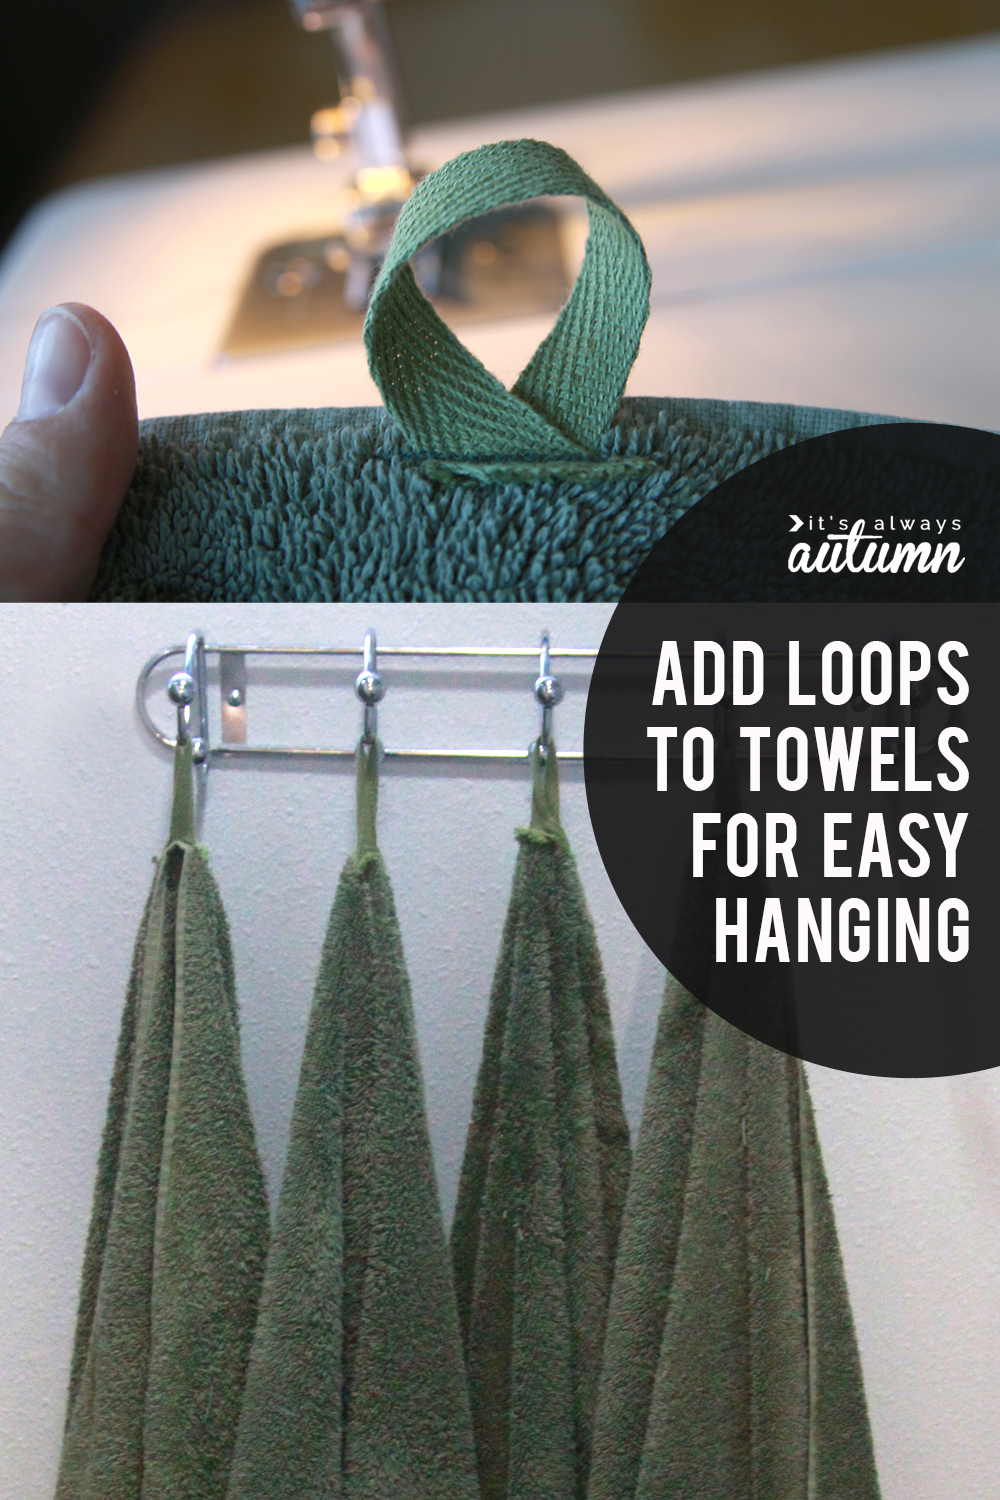 Tired of towels on the ground? Sew on loops for easy hanging!